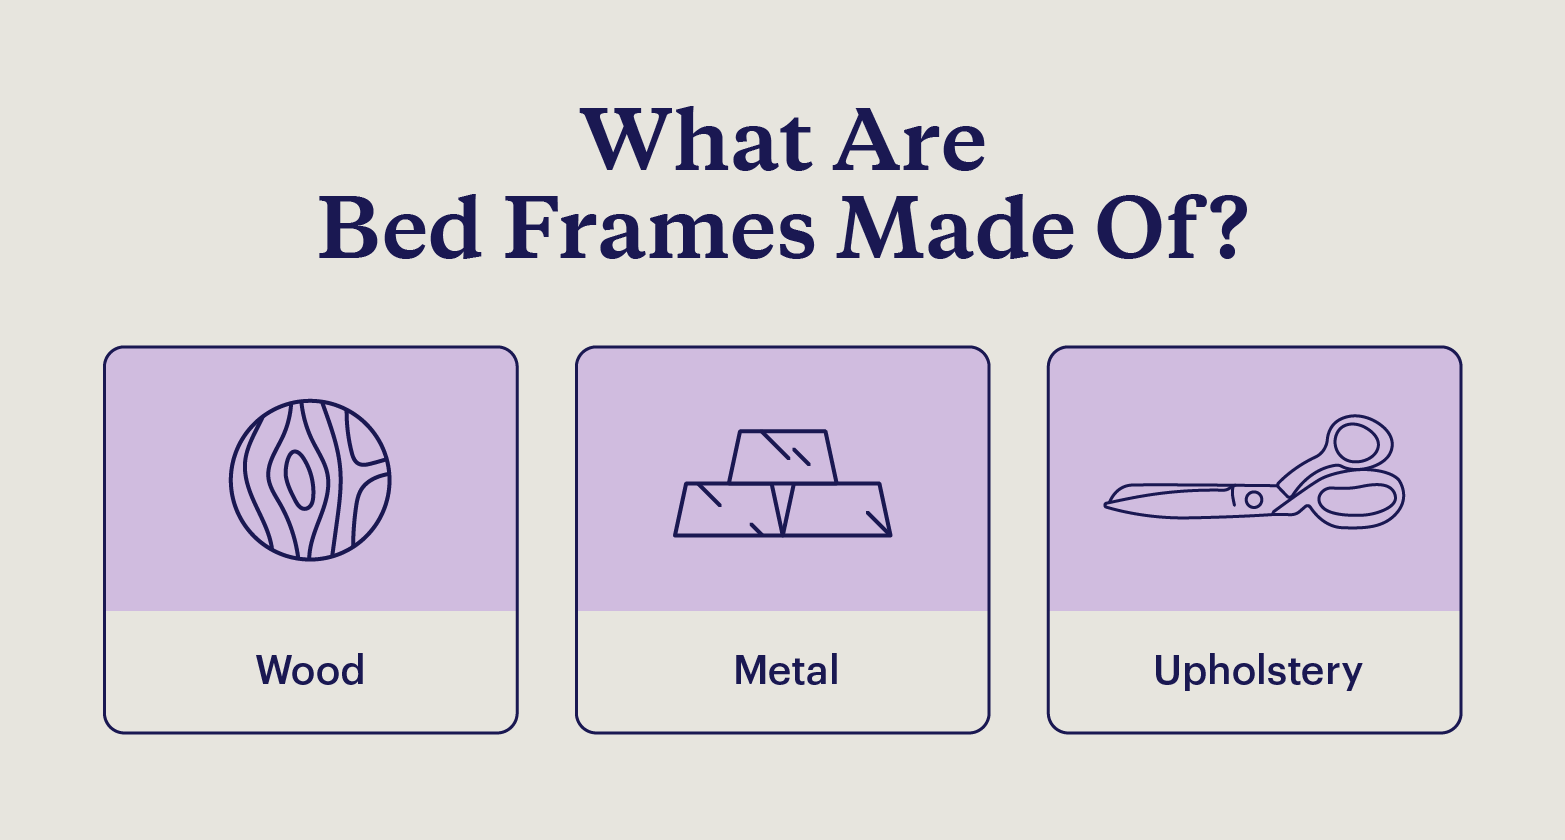 A list of bed frame materials with icons for each, including wood, metal, and upholstery.